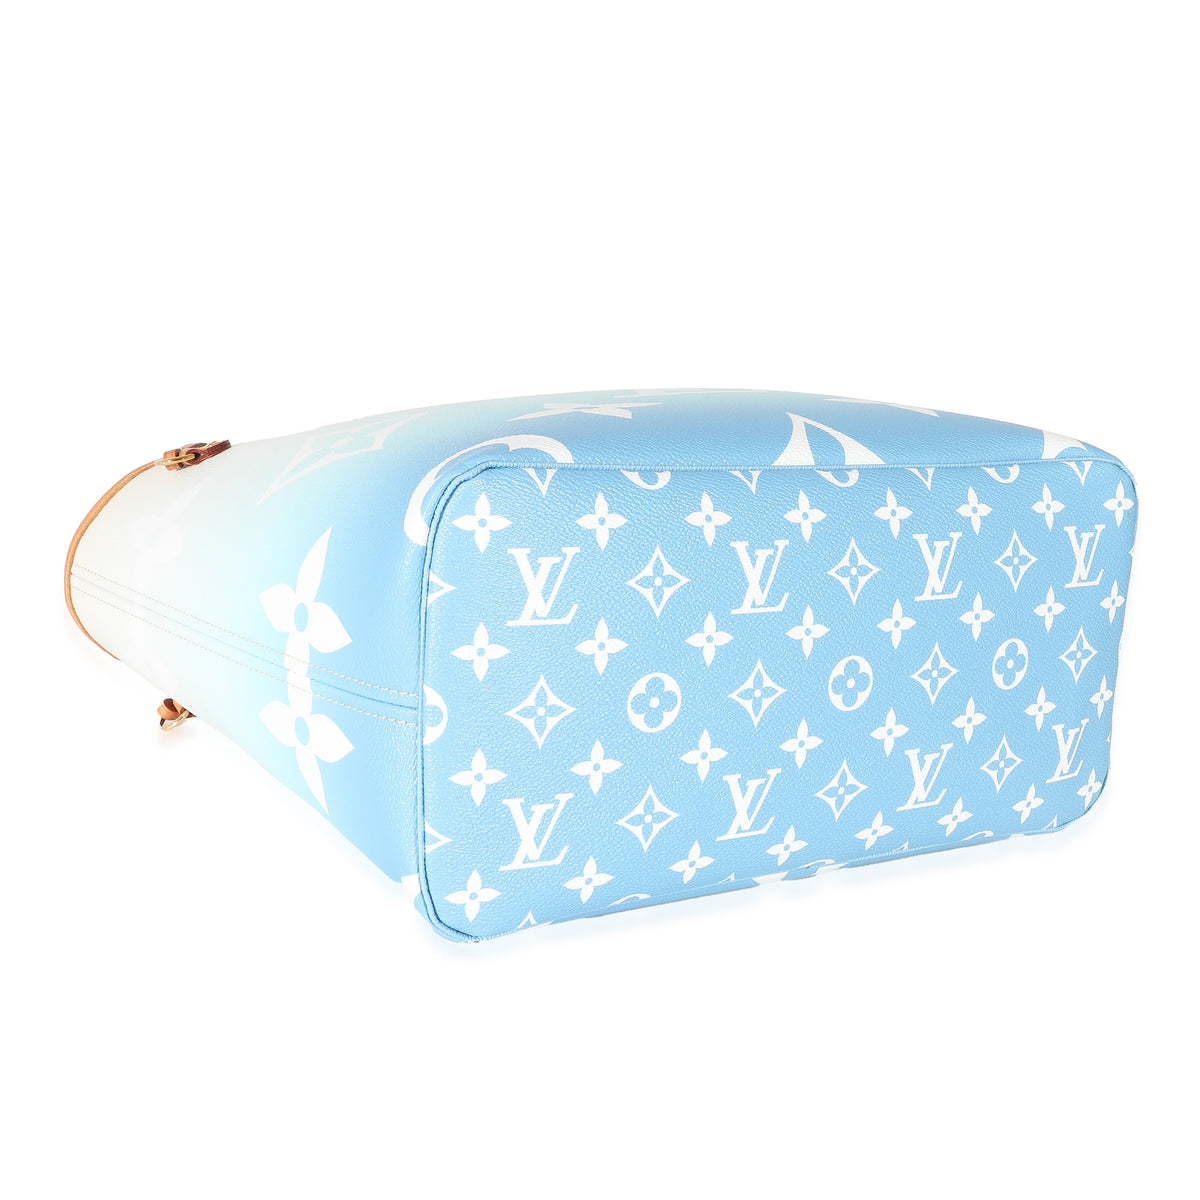 Louis Vuitton Blue & White Giant Monogram Canvas By The Pool Neverfull MM